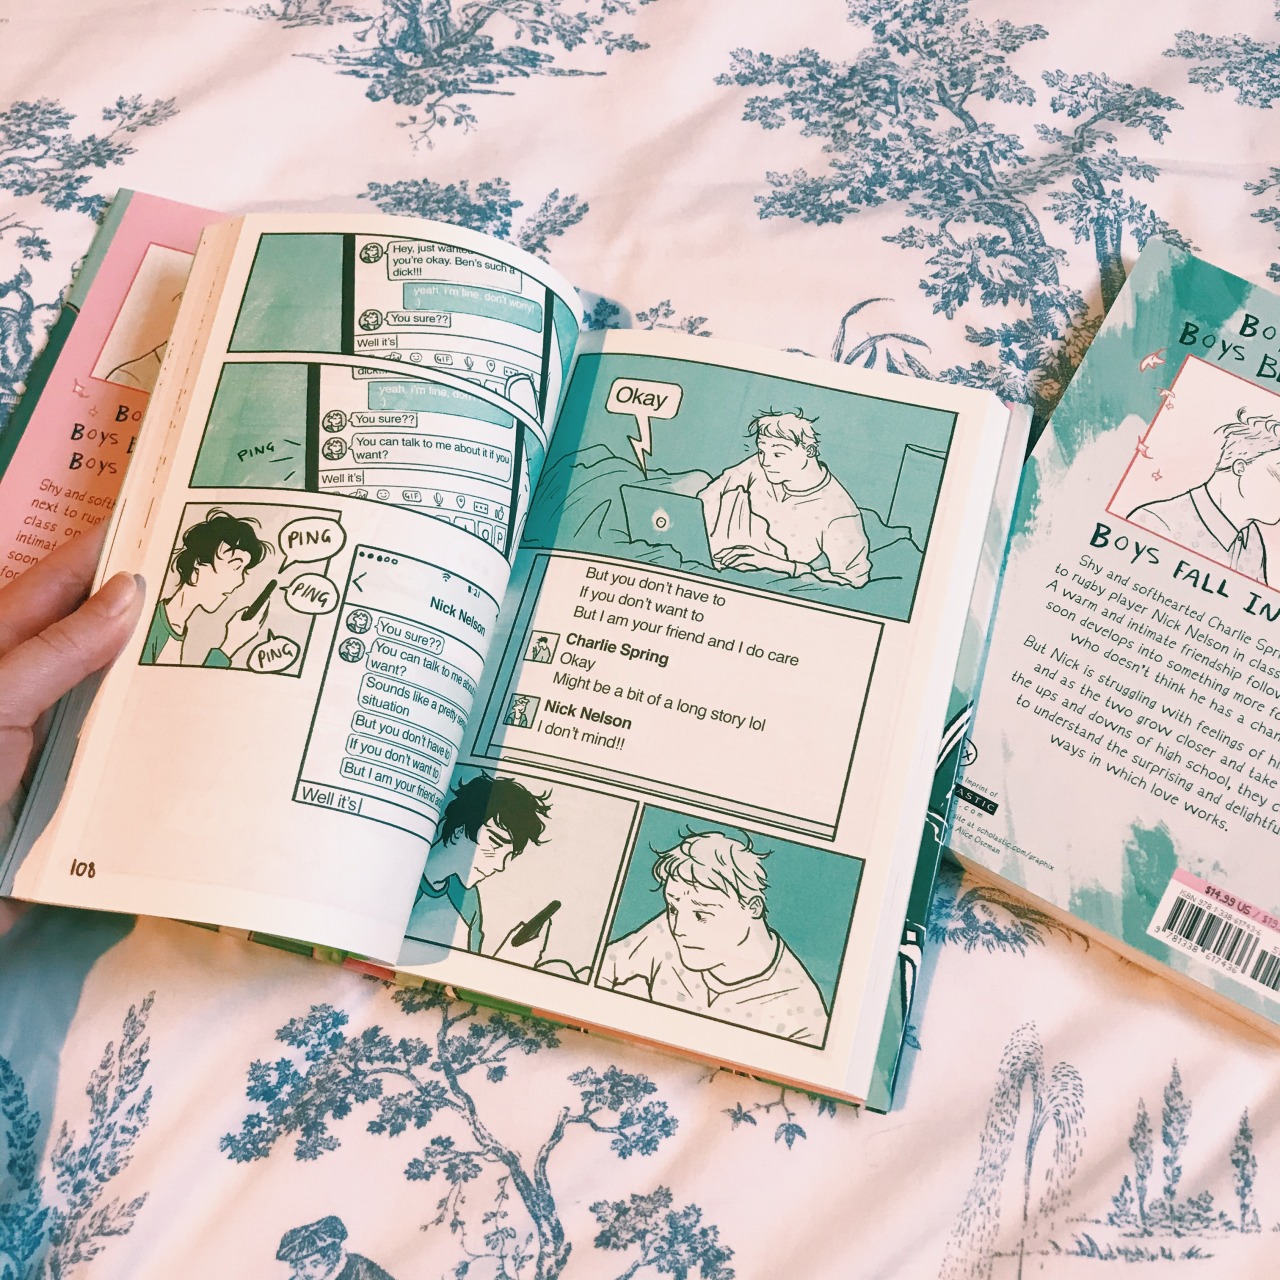 HEARTSTOPPER — HEARTSTOPPER VOLUME ONE is out today in the US and...